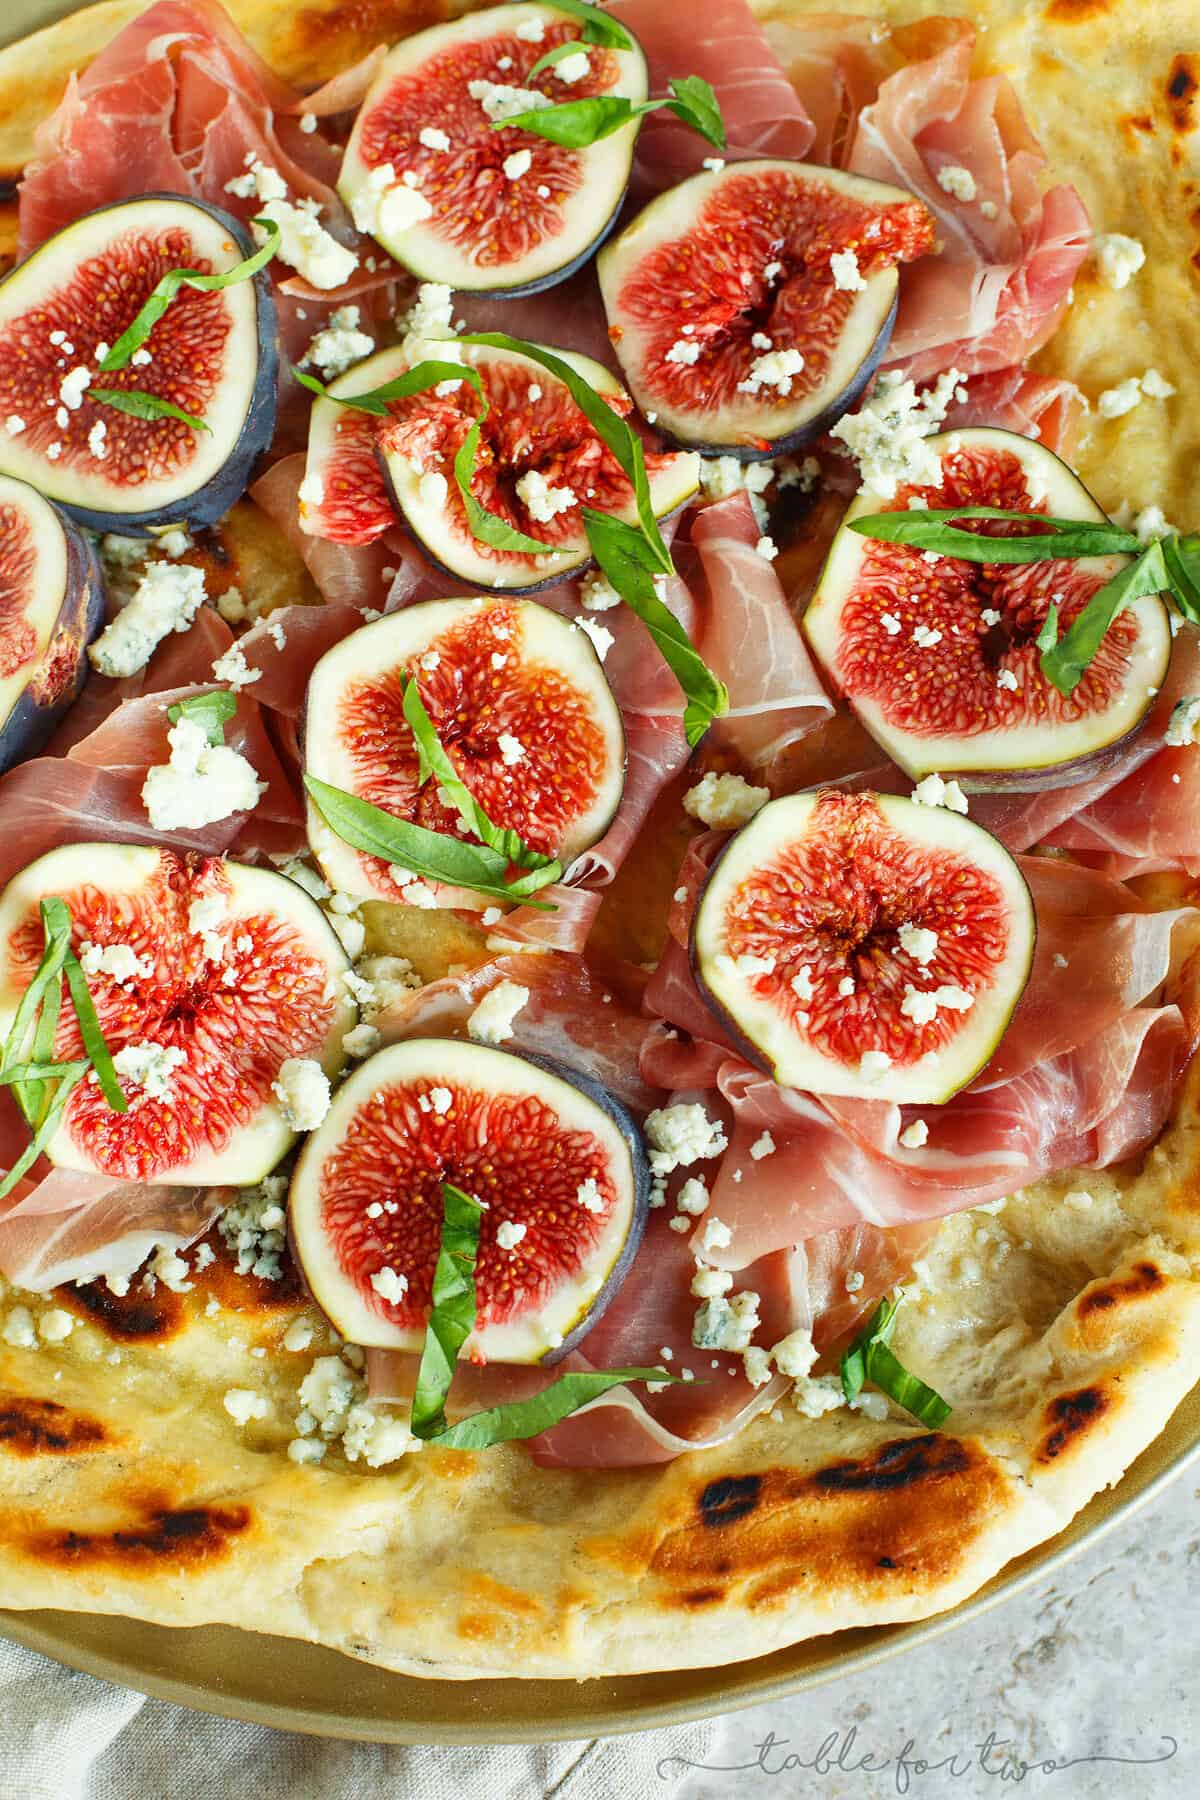 A classic combination of flavors but what better than to throw it on a grilled pizza? The pungent blue cheese pairs so well with the rest of the sweet figs and salty prosciutto!